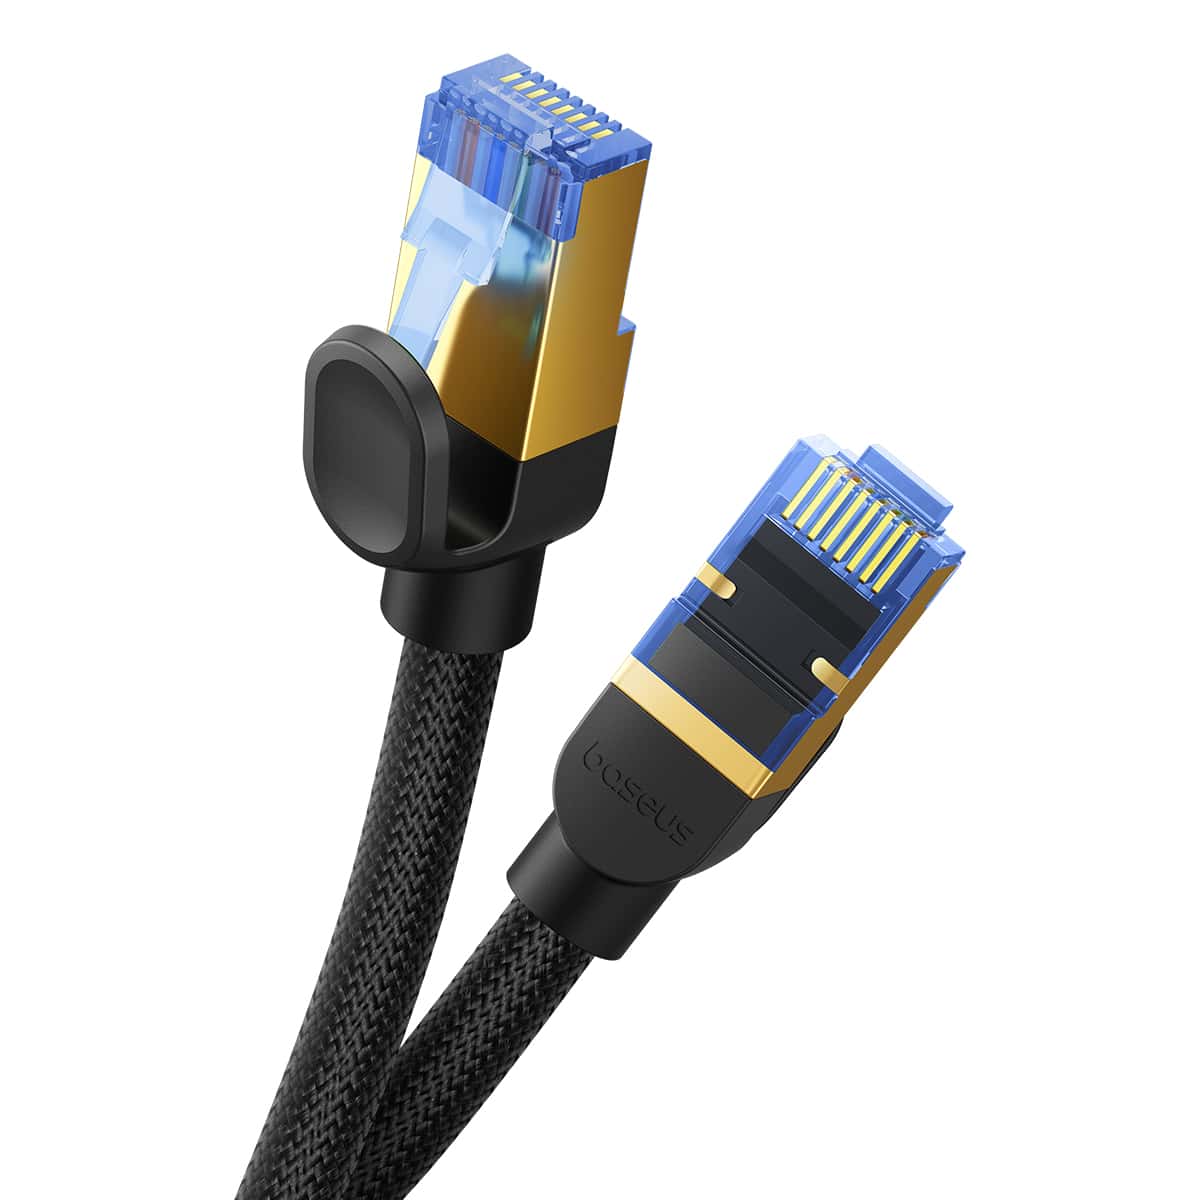 Baseus High Speed CAT7 10Gigabit Ethernet Cable (Braided Cable) Cluster Black